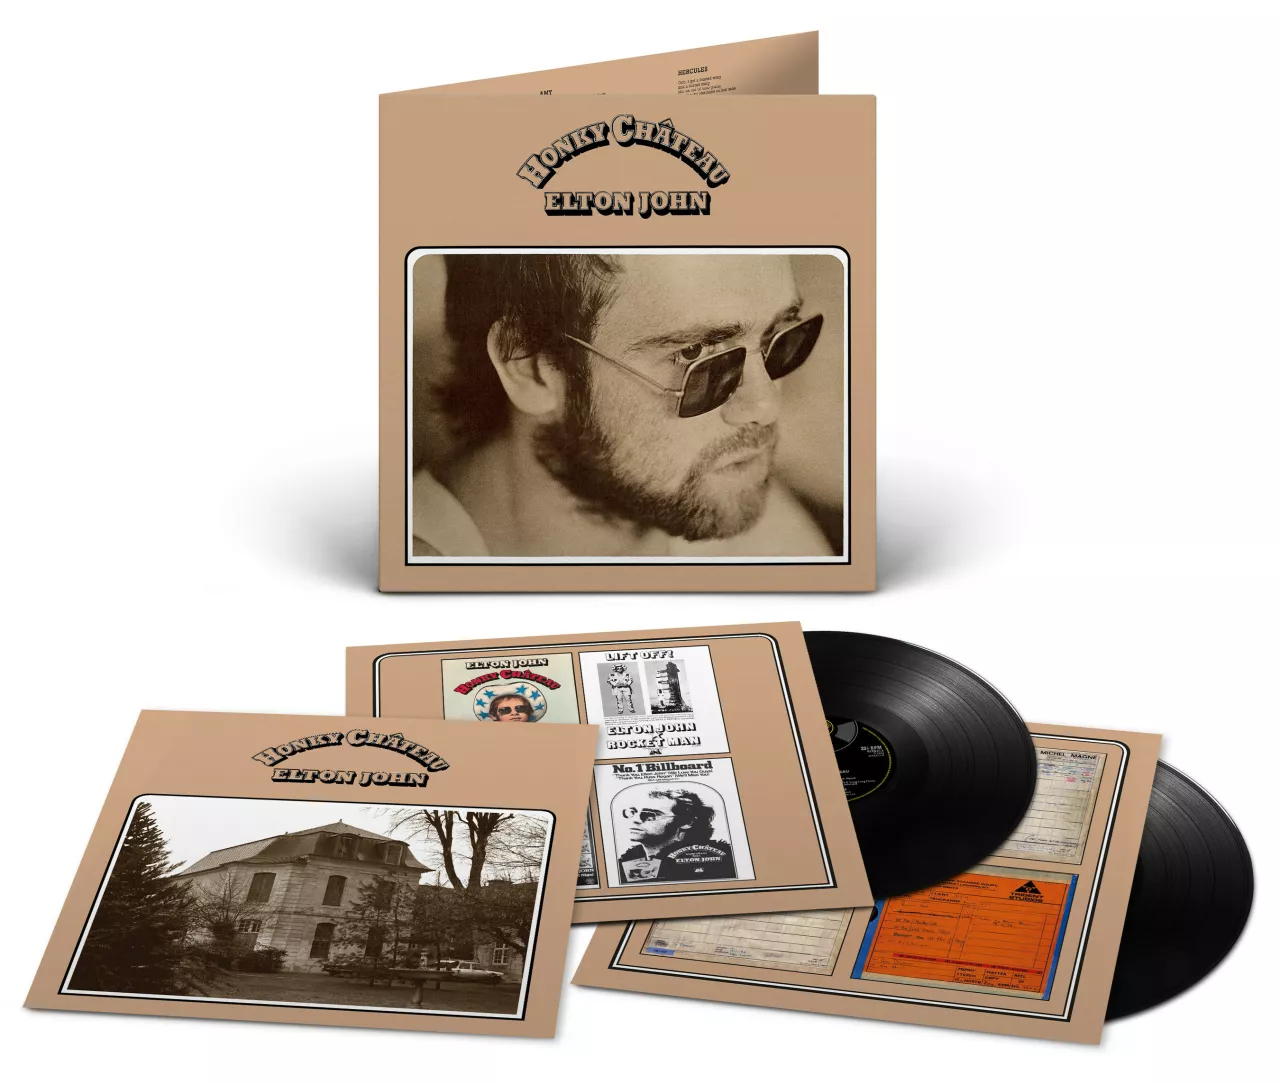 Today, UMe releases the 50th anniversary edition of Elton John’s seminal album Honky Château, out now on 2CD, 2LP, and limited-edition gold vinyl LP. Originally released in May 1972, Honky Château was Elton’s step into global superstardom, spawning classics such as “Rocket Man,” “Honky Cat” and “Mona Lisas and Mad Hatters.” His 5th studio album ushered in a to-this-day unparalleled hot streak of classic albums. img#1